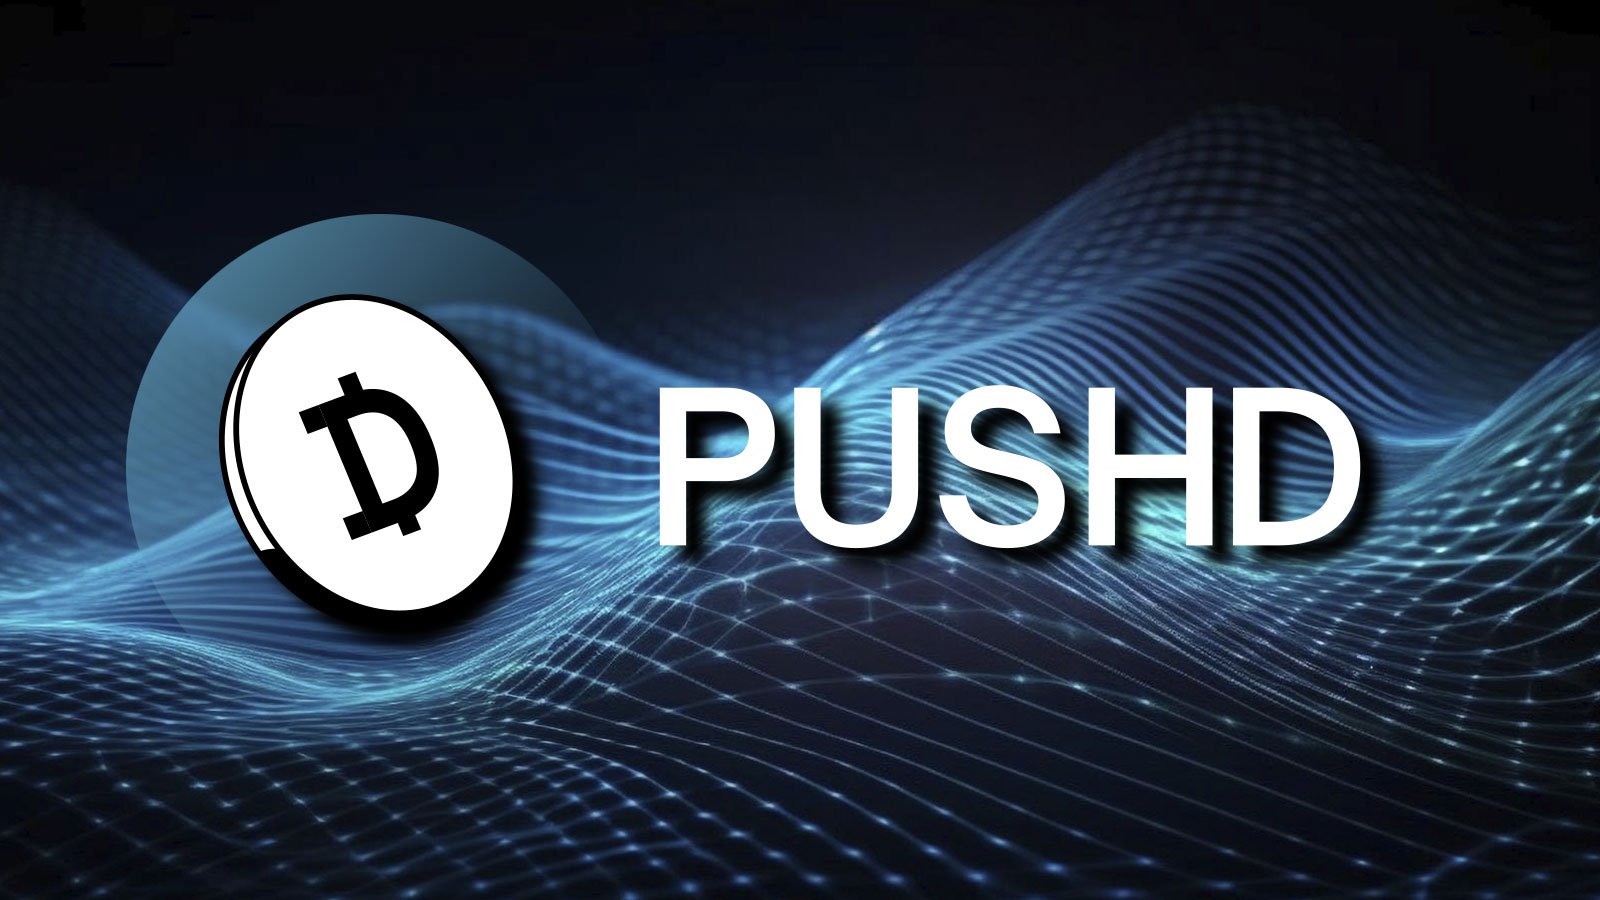 Pushd (PUSHD) Pre-Sale Onboarding New Supporters  in Late April as XRP, Ethereum (ETH) Enthusiasts Remain Optimistic